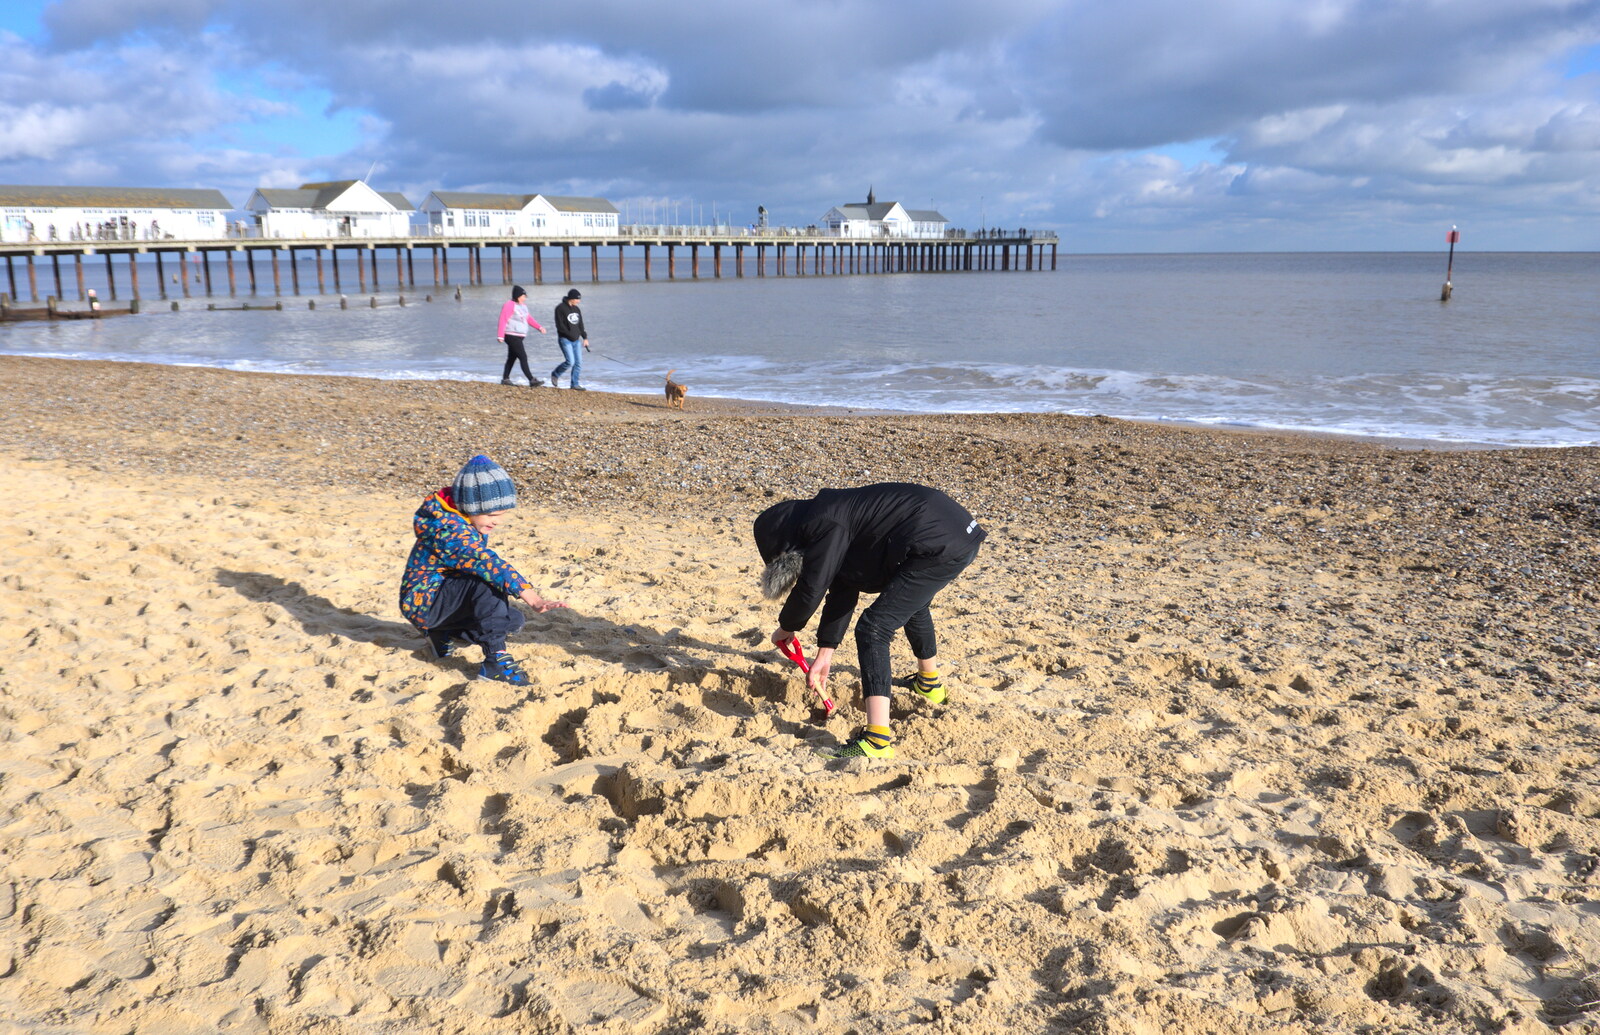 The boys dig in the sand from A Trip to the Amusements, Southwold Pier, Southwold, Suffolk - 5th November 2017